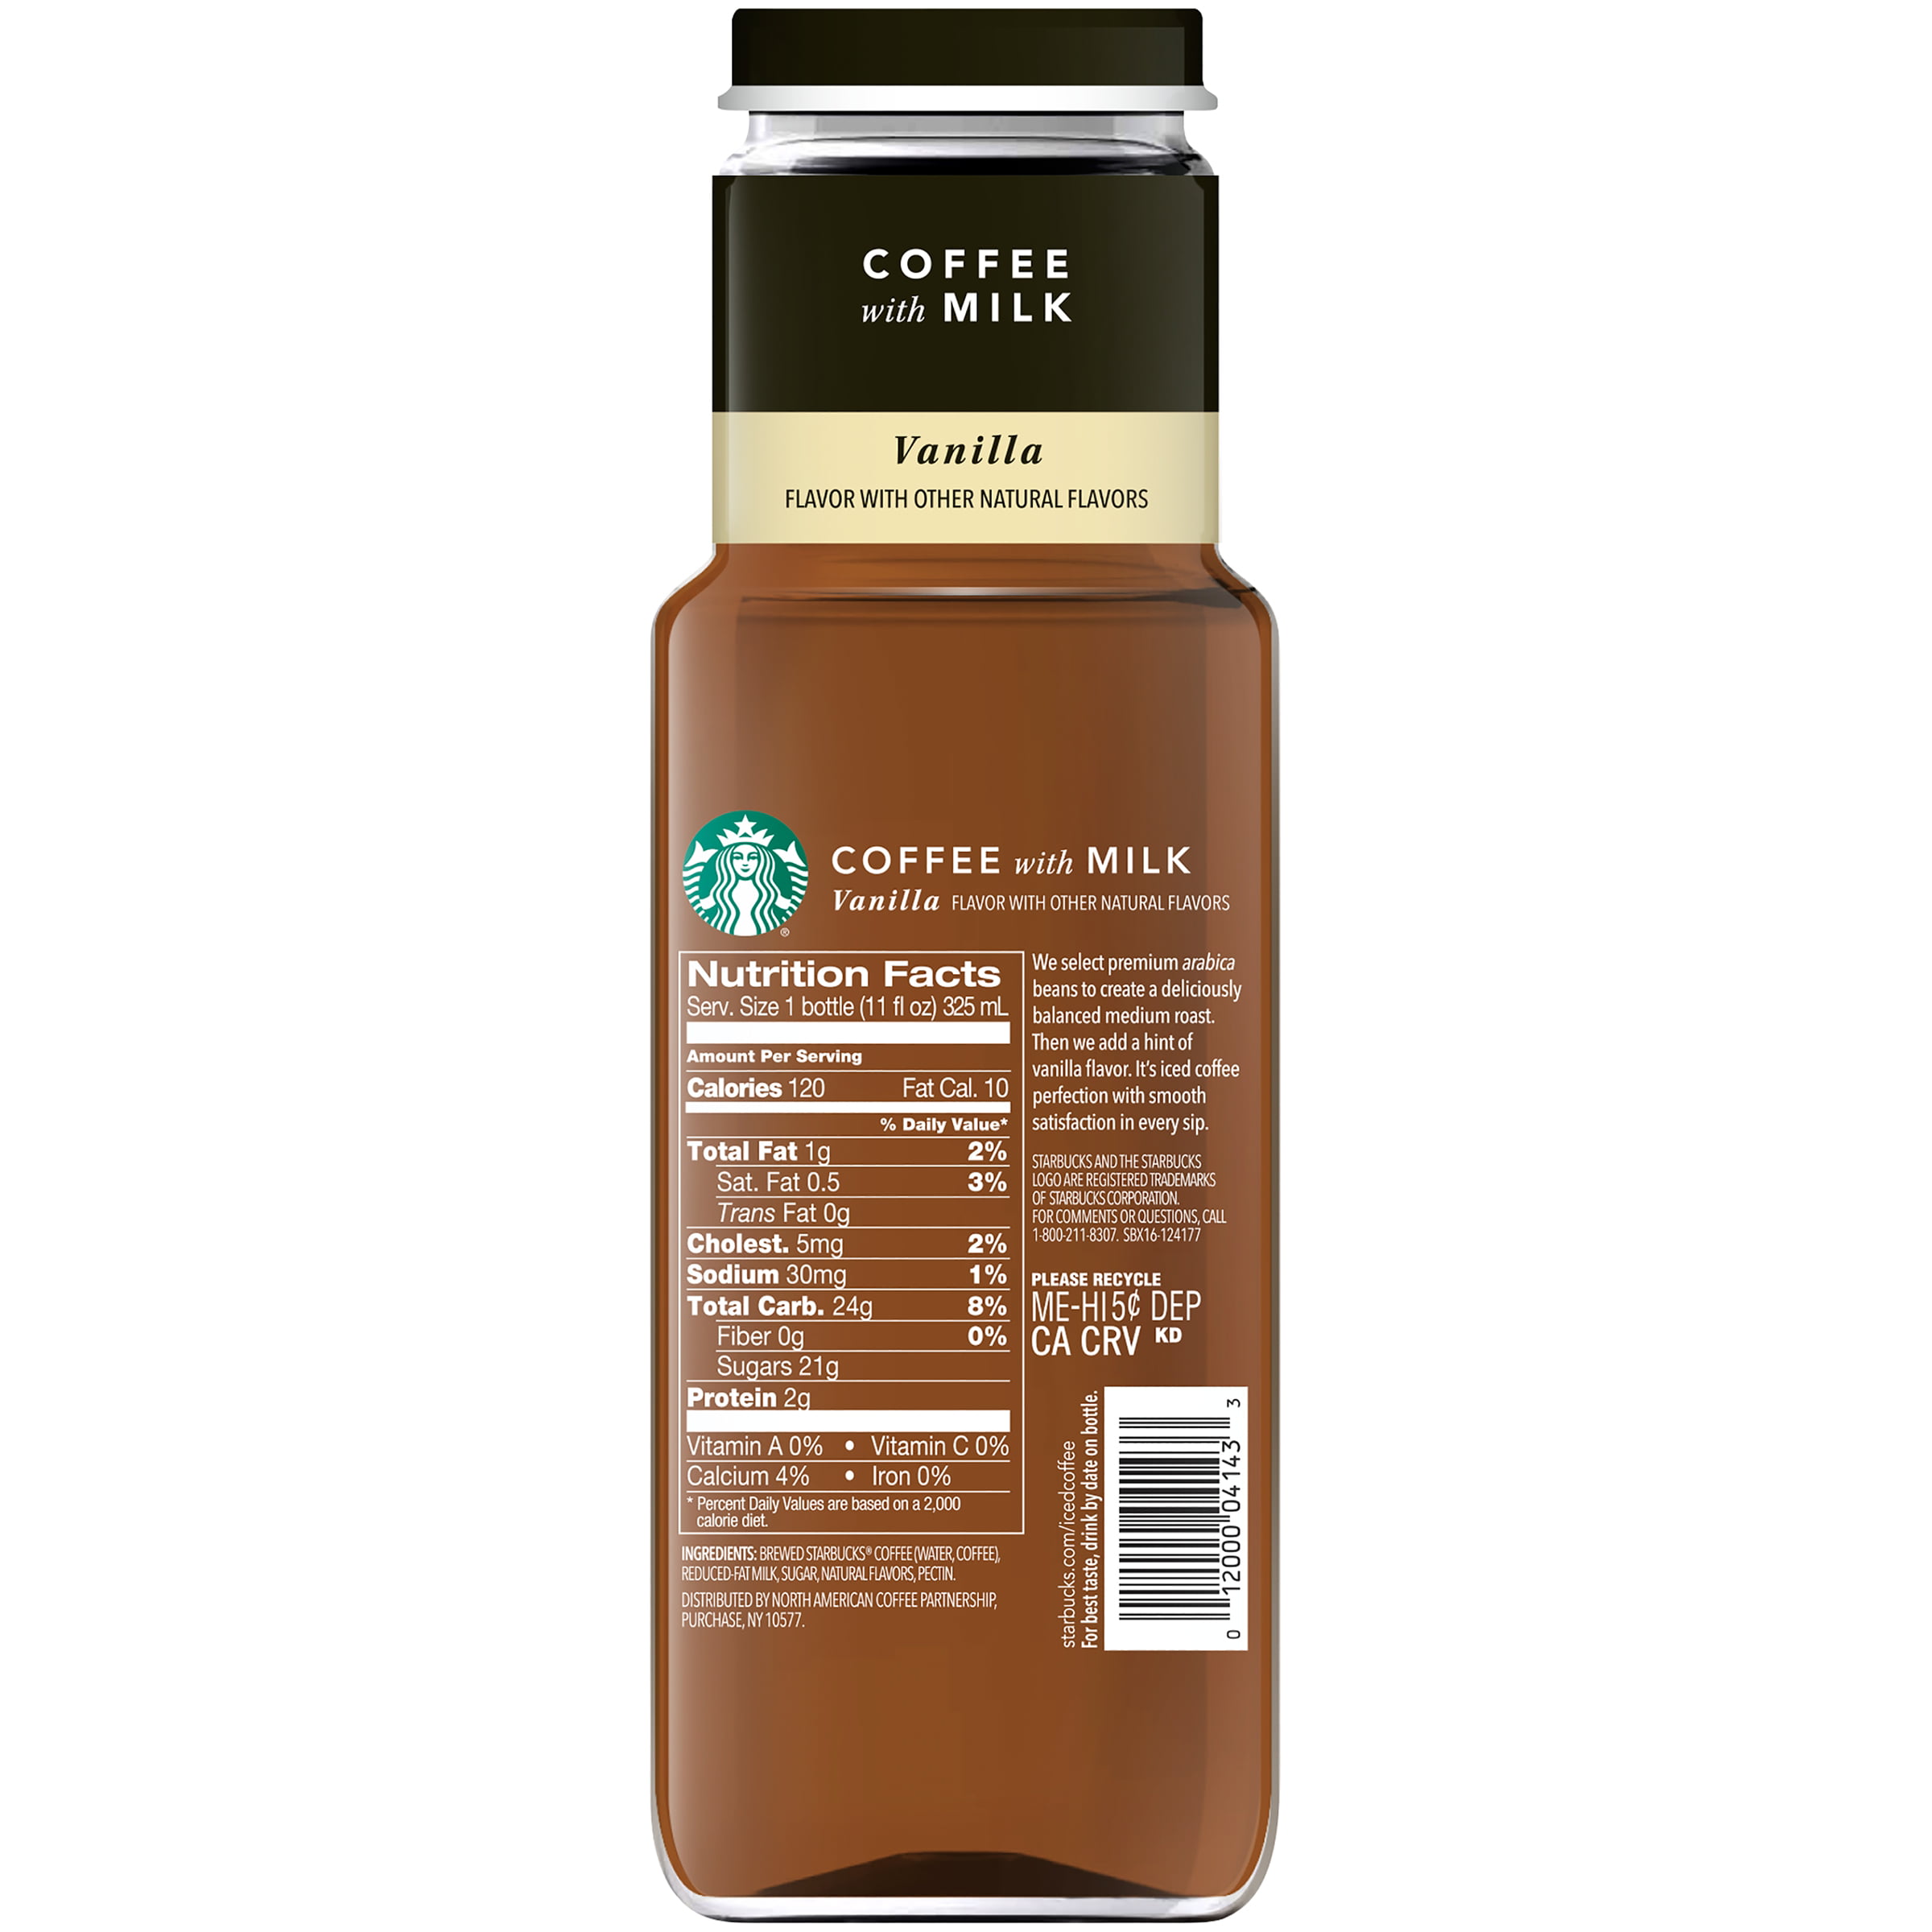 Starbucks Iced Coffee Bottle Calories - Best Pictures and ...